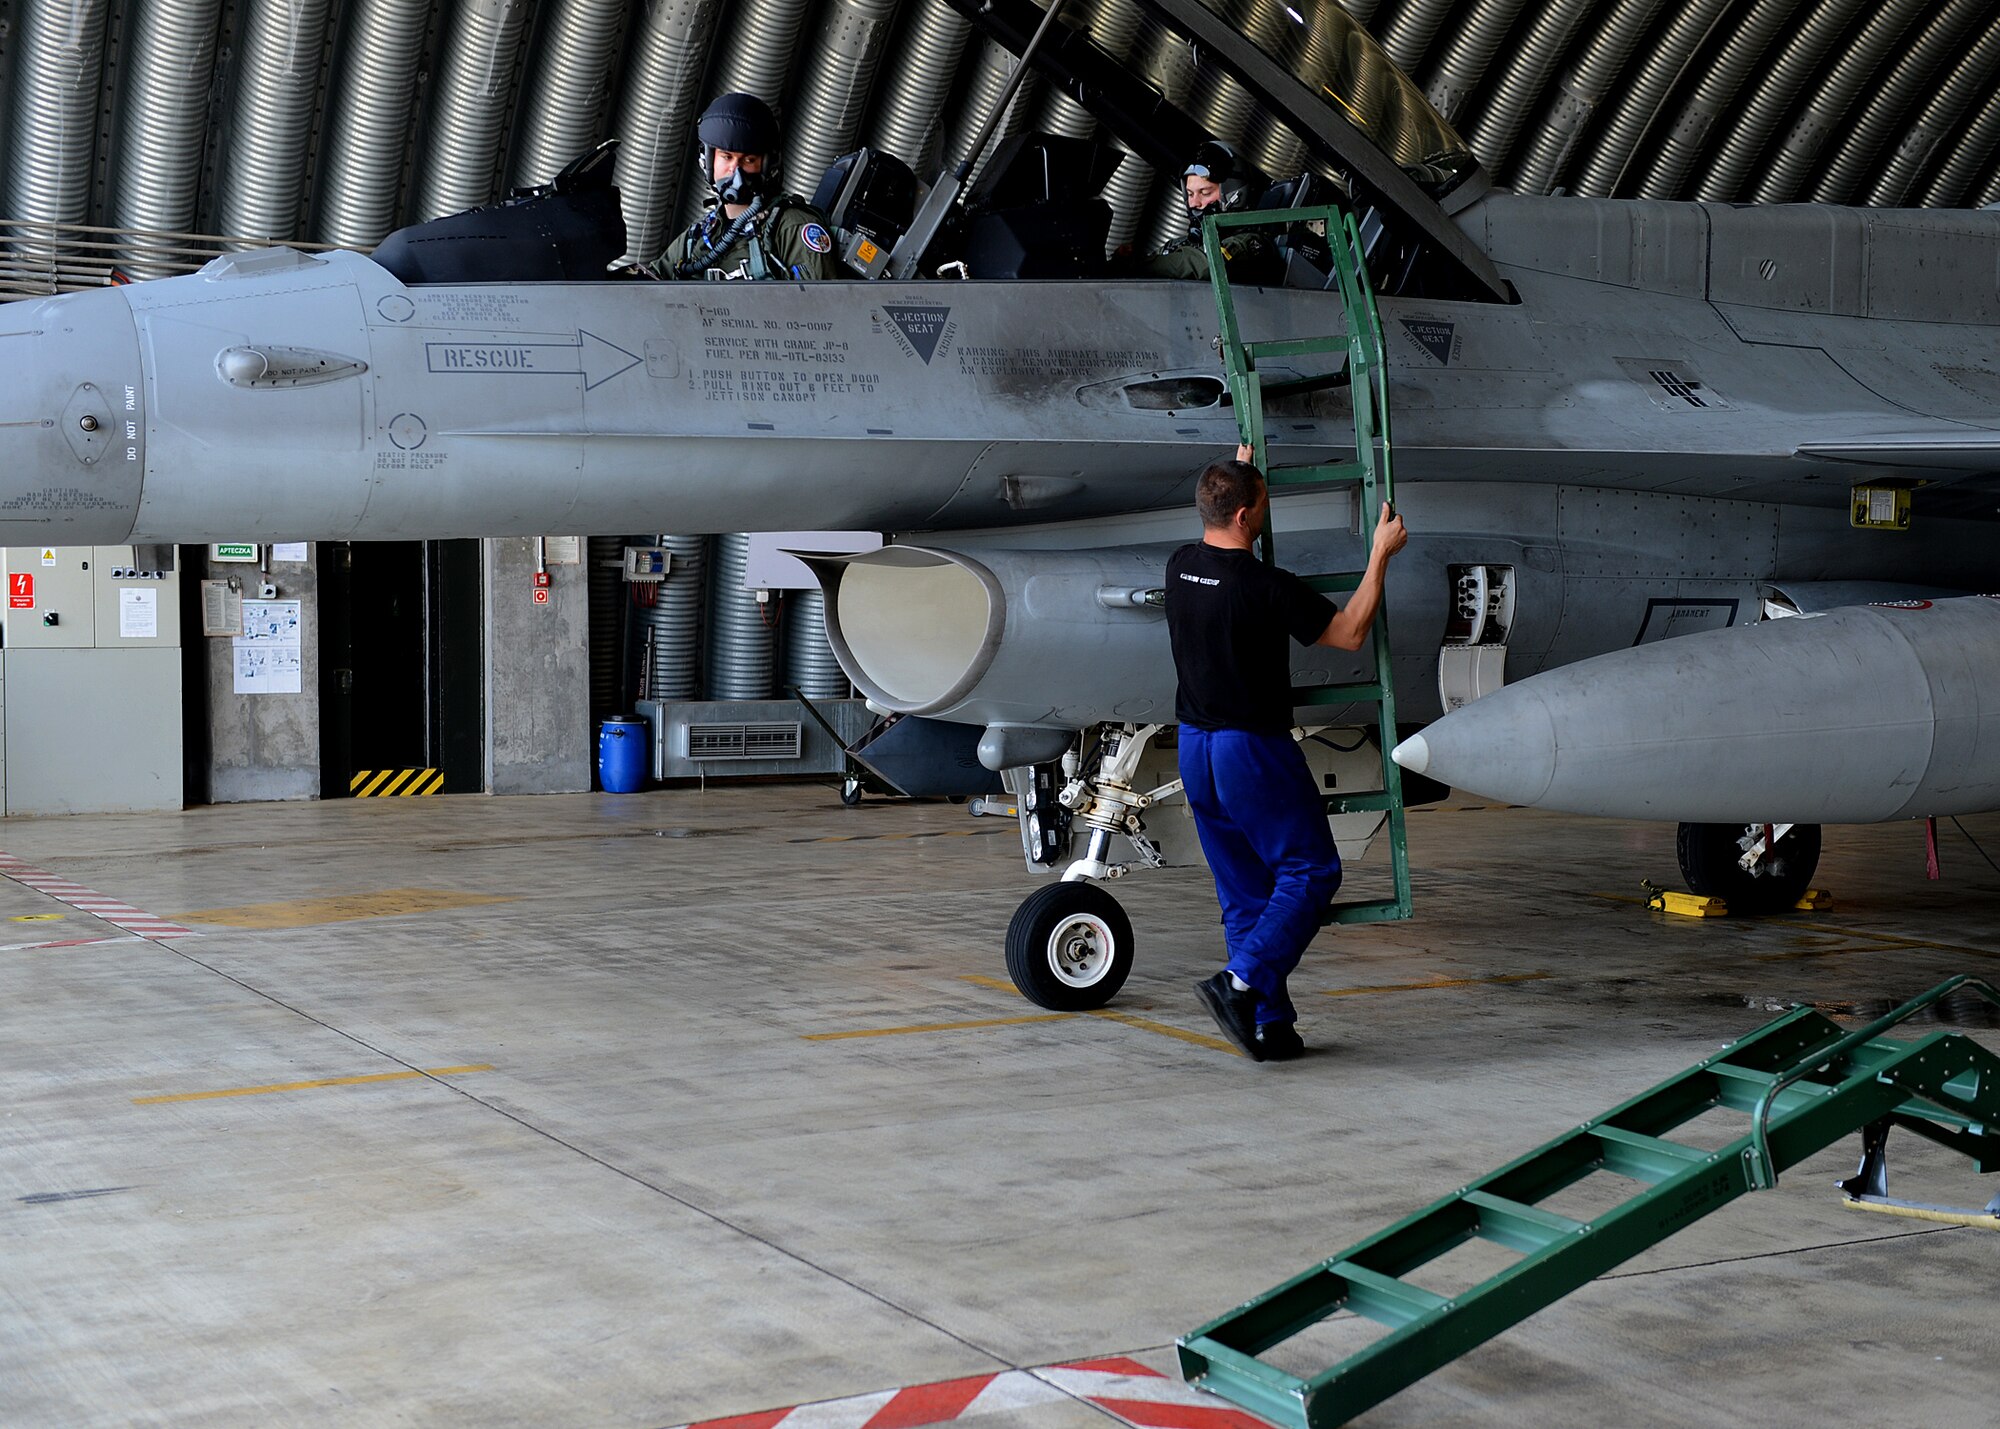 Polish air force Warrant Officer Cichecki Martin, crew chief, removes a ladder from an F-16 Fighting Falcon fighter aircraft in preparation for Exercise EAGLE TALON at Lask Air Base, Poland, June 10, 2014. NATO allies were either on a blue and red team to simulate friendly and enemy aircraft. During combined exercises such as these, pilots train in a simulated environment to enhance air-to-air and air-to-surface capabilities. (U.S. Air Force photo by Airman 1st Class Kyle Gese/Released)